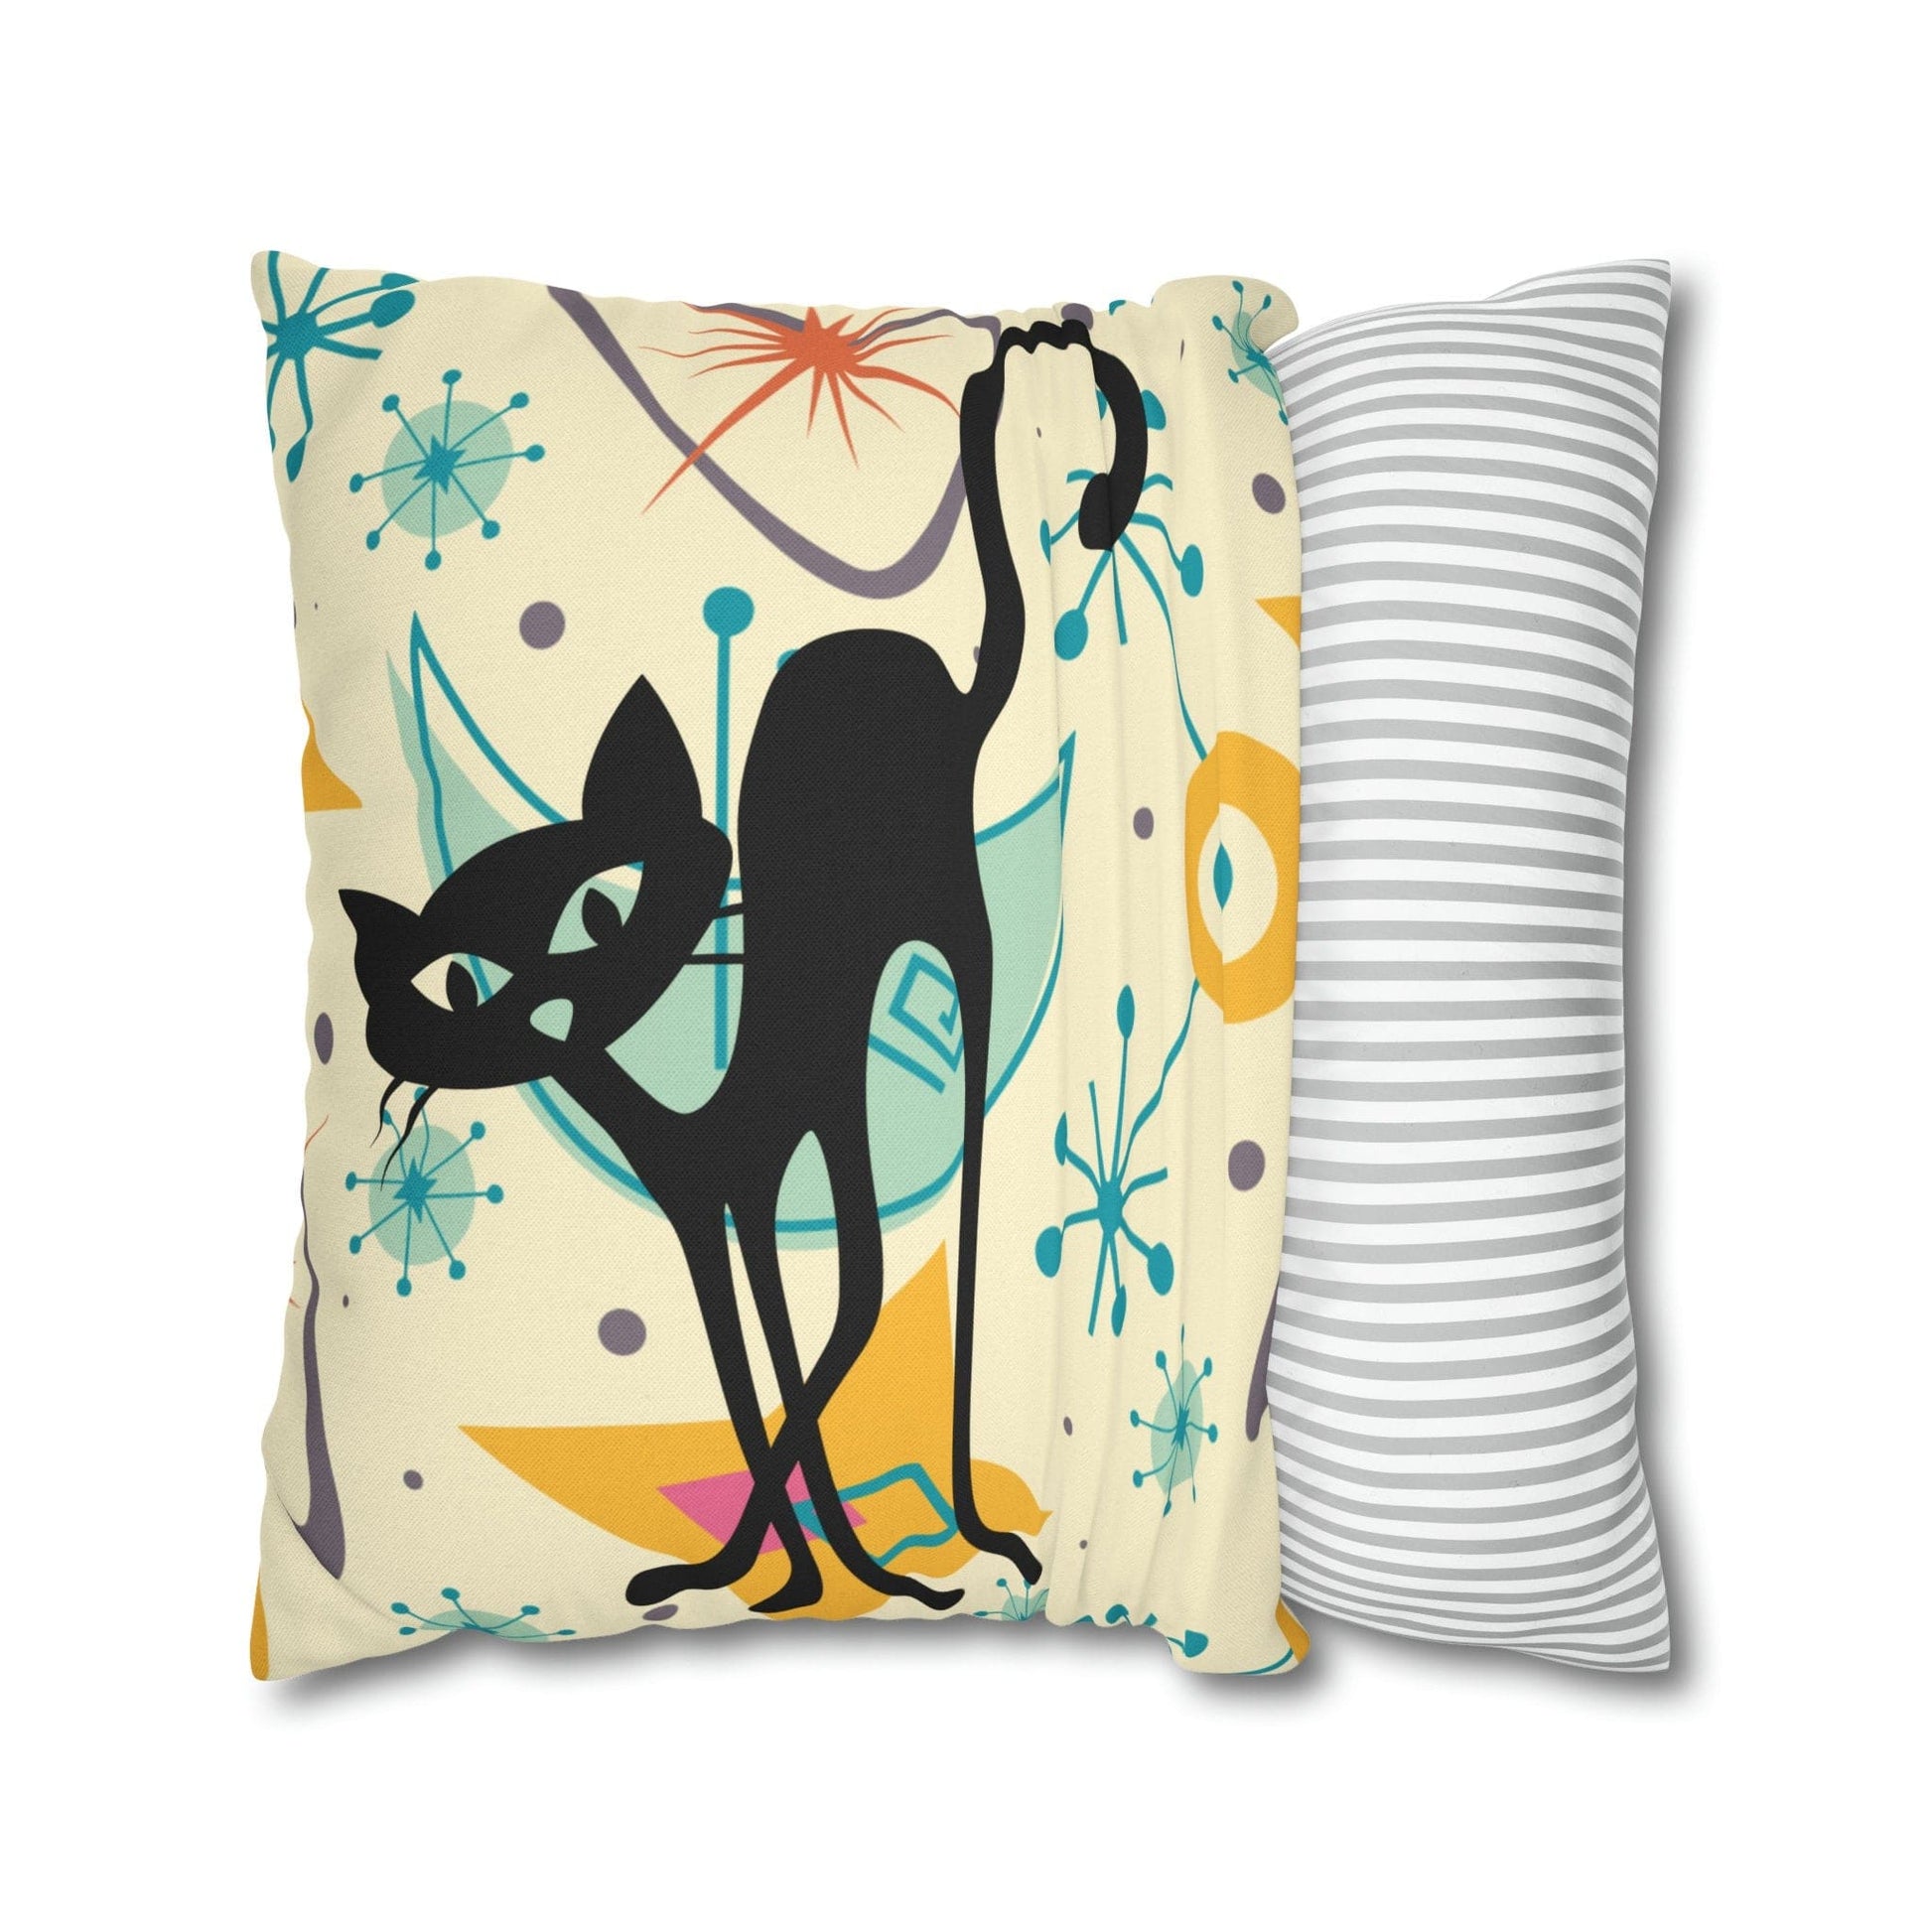 Kate McEnroe New York Retro Kitschy Cat Mid Mod Boomerang Starbursts Pillow Cover, Atomic MCM Cushion Covers, Mid Century Modern Living Room, Bedroom Decor Throw Pillow Covers